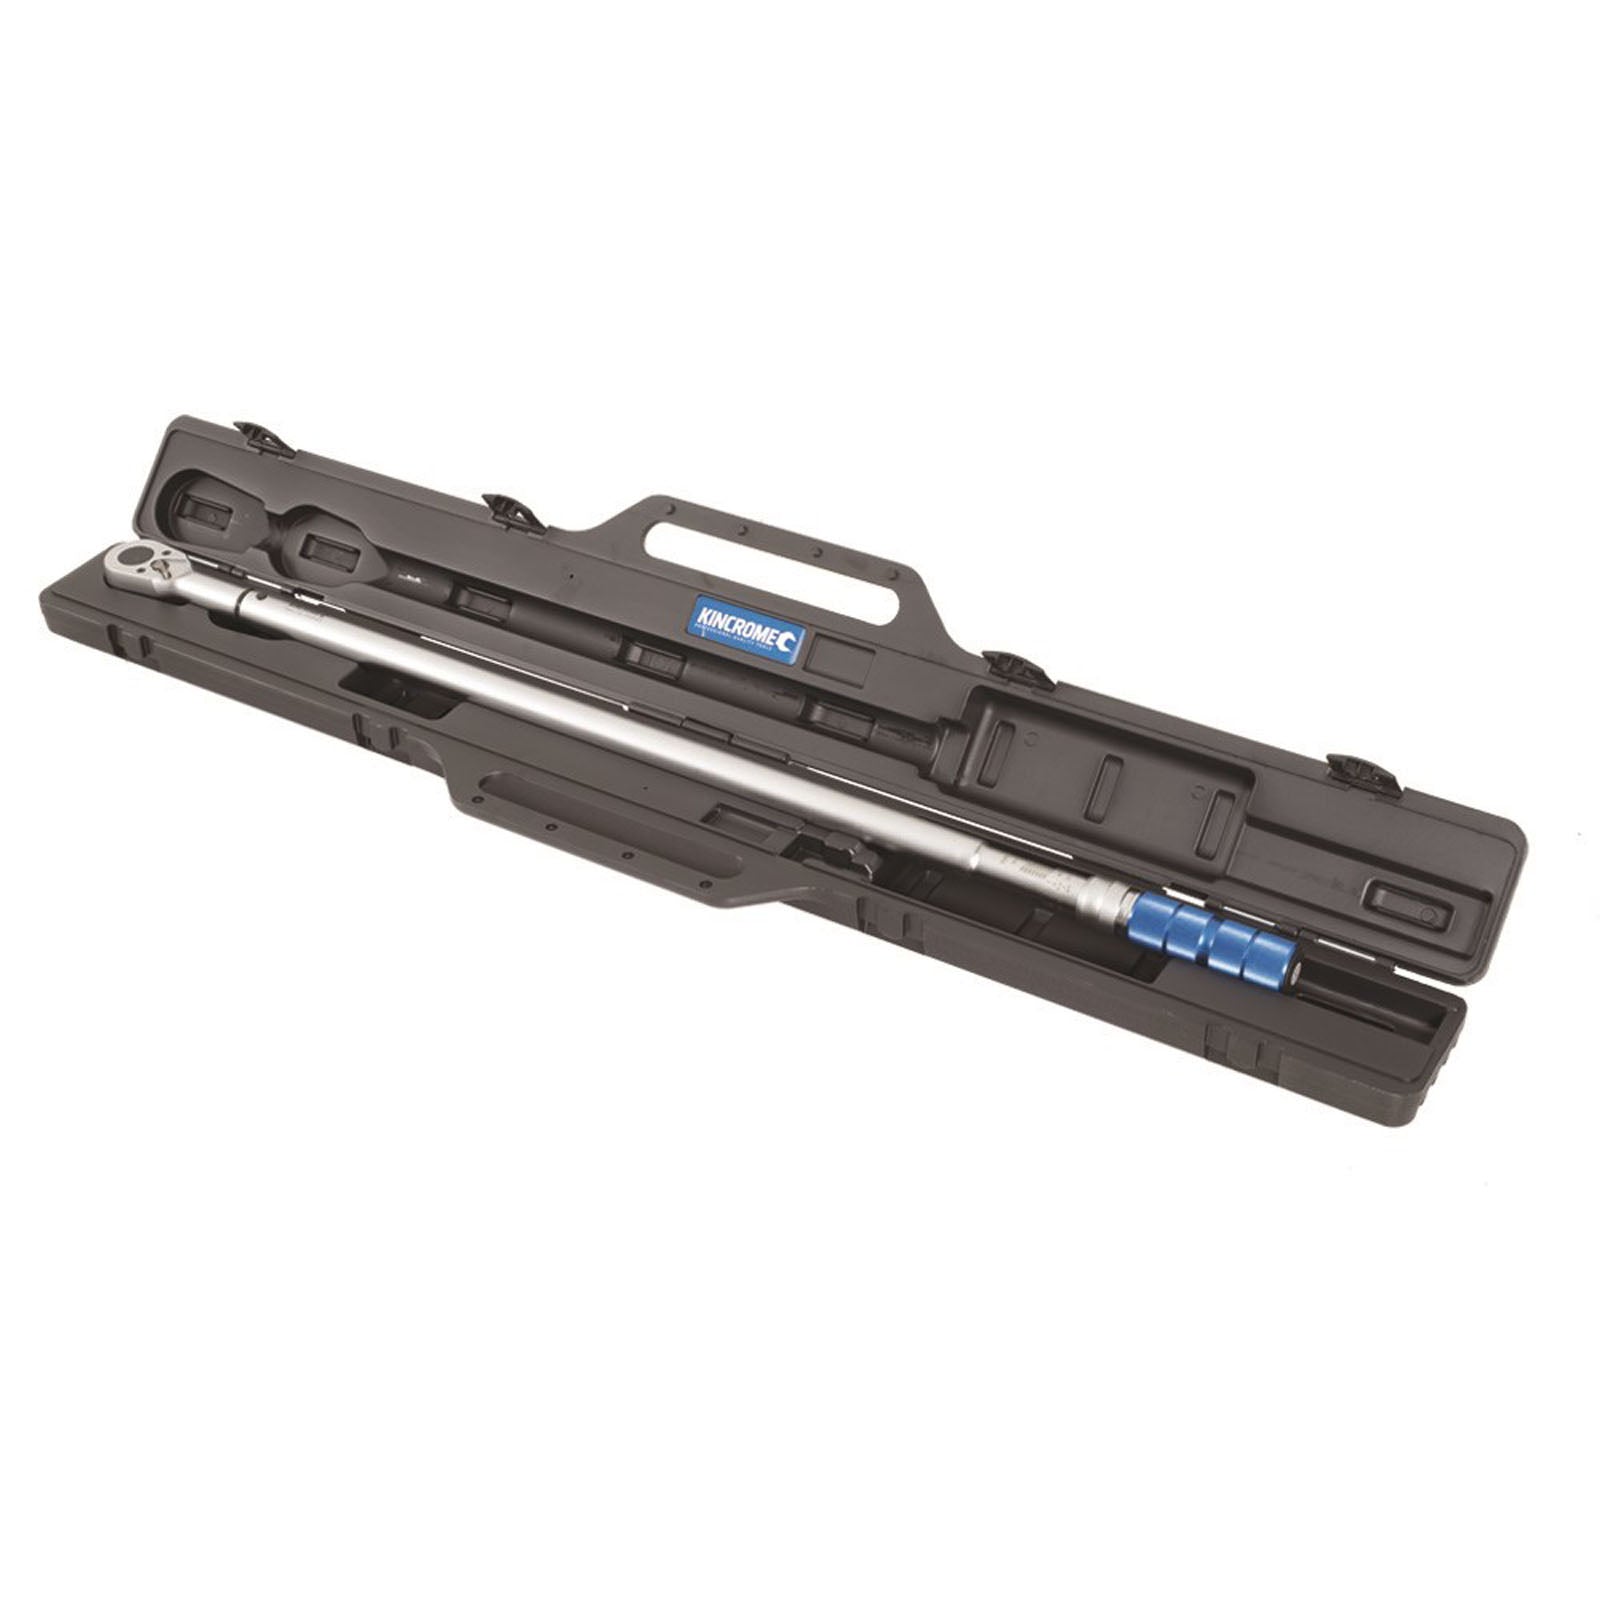 3/4" Torque Wrench 150-750N·m - K8503 by Kincrome